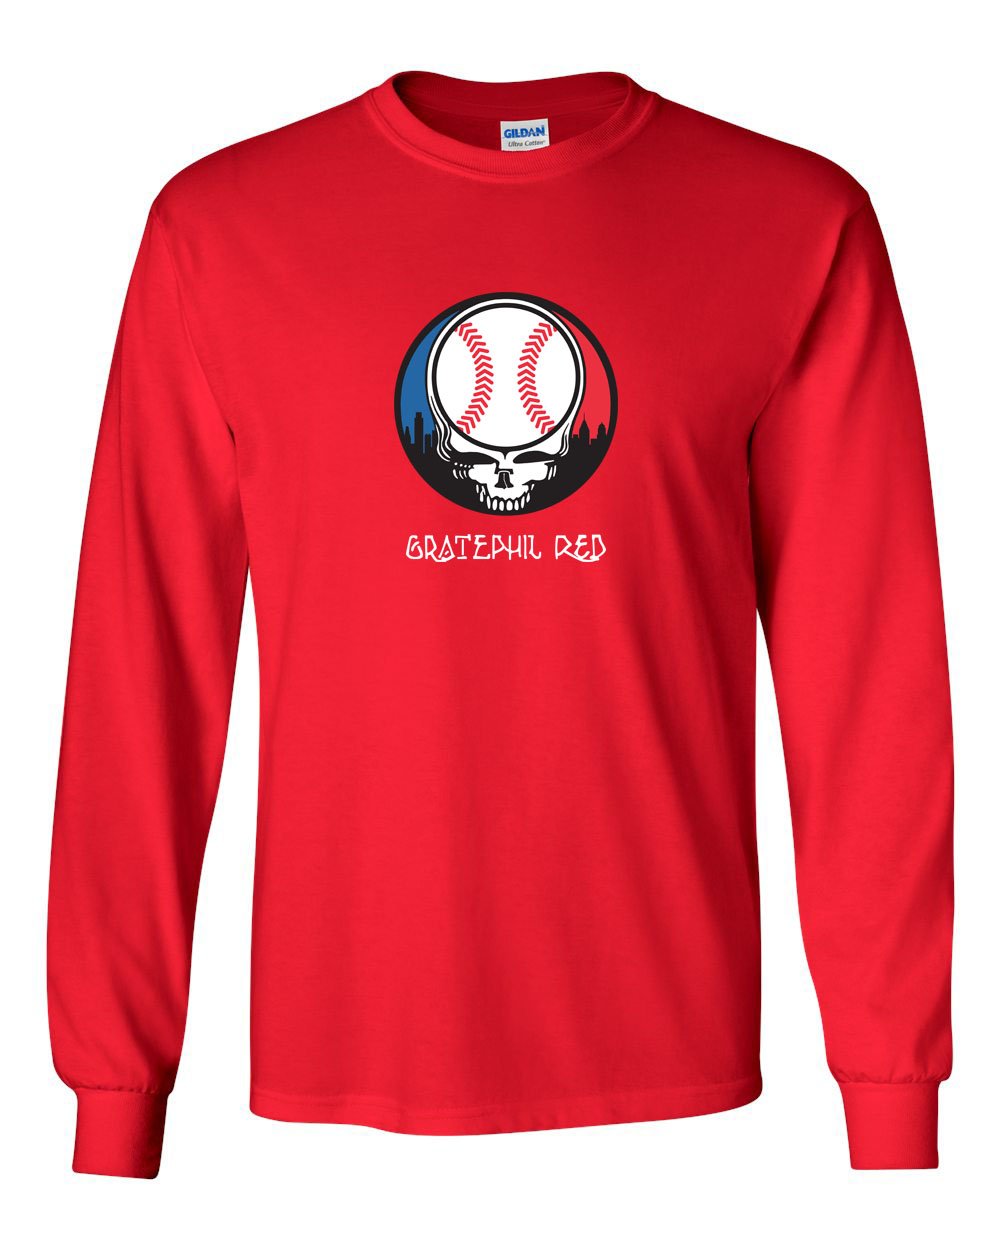 Gratephil Red MENS Long Sleeve Heavy Cotton T-Shirt